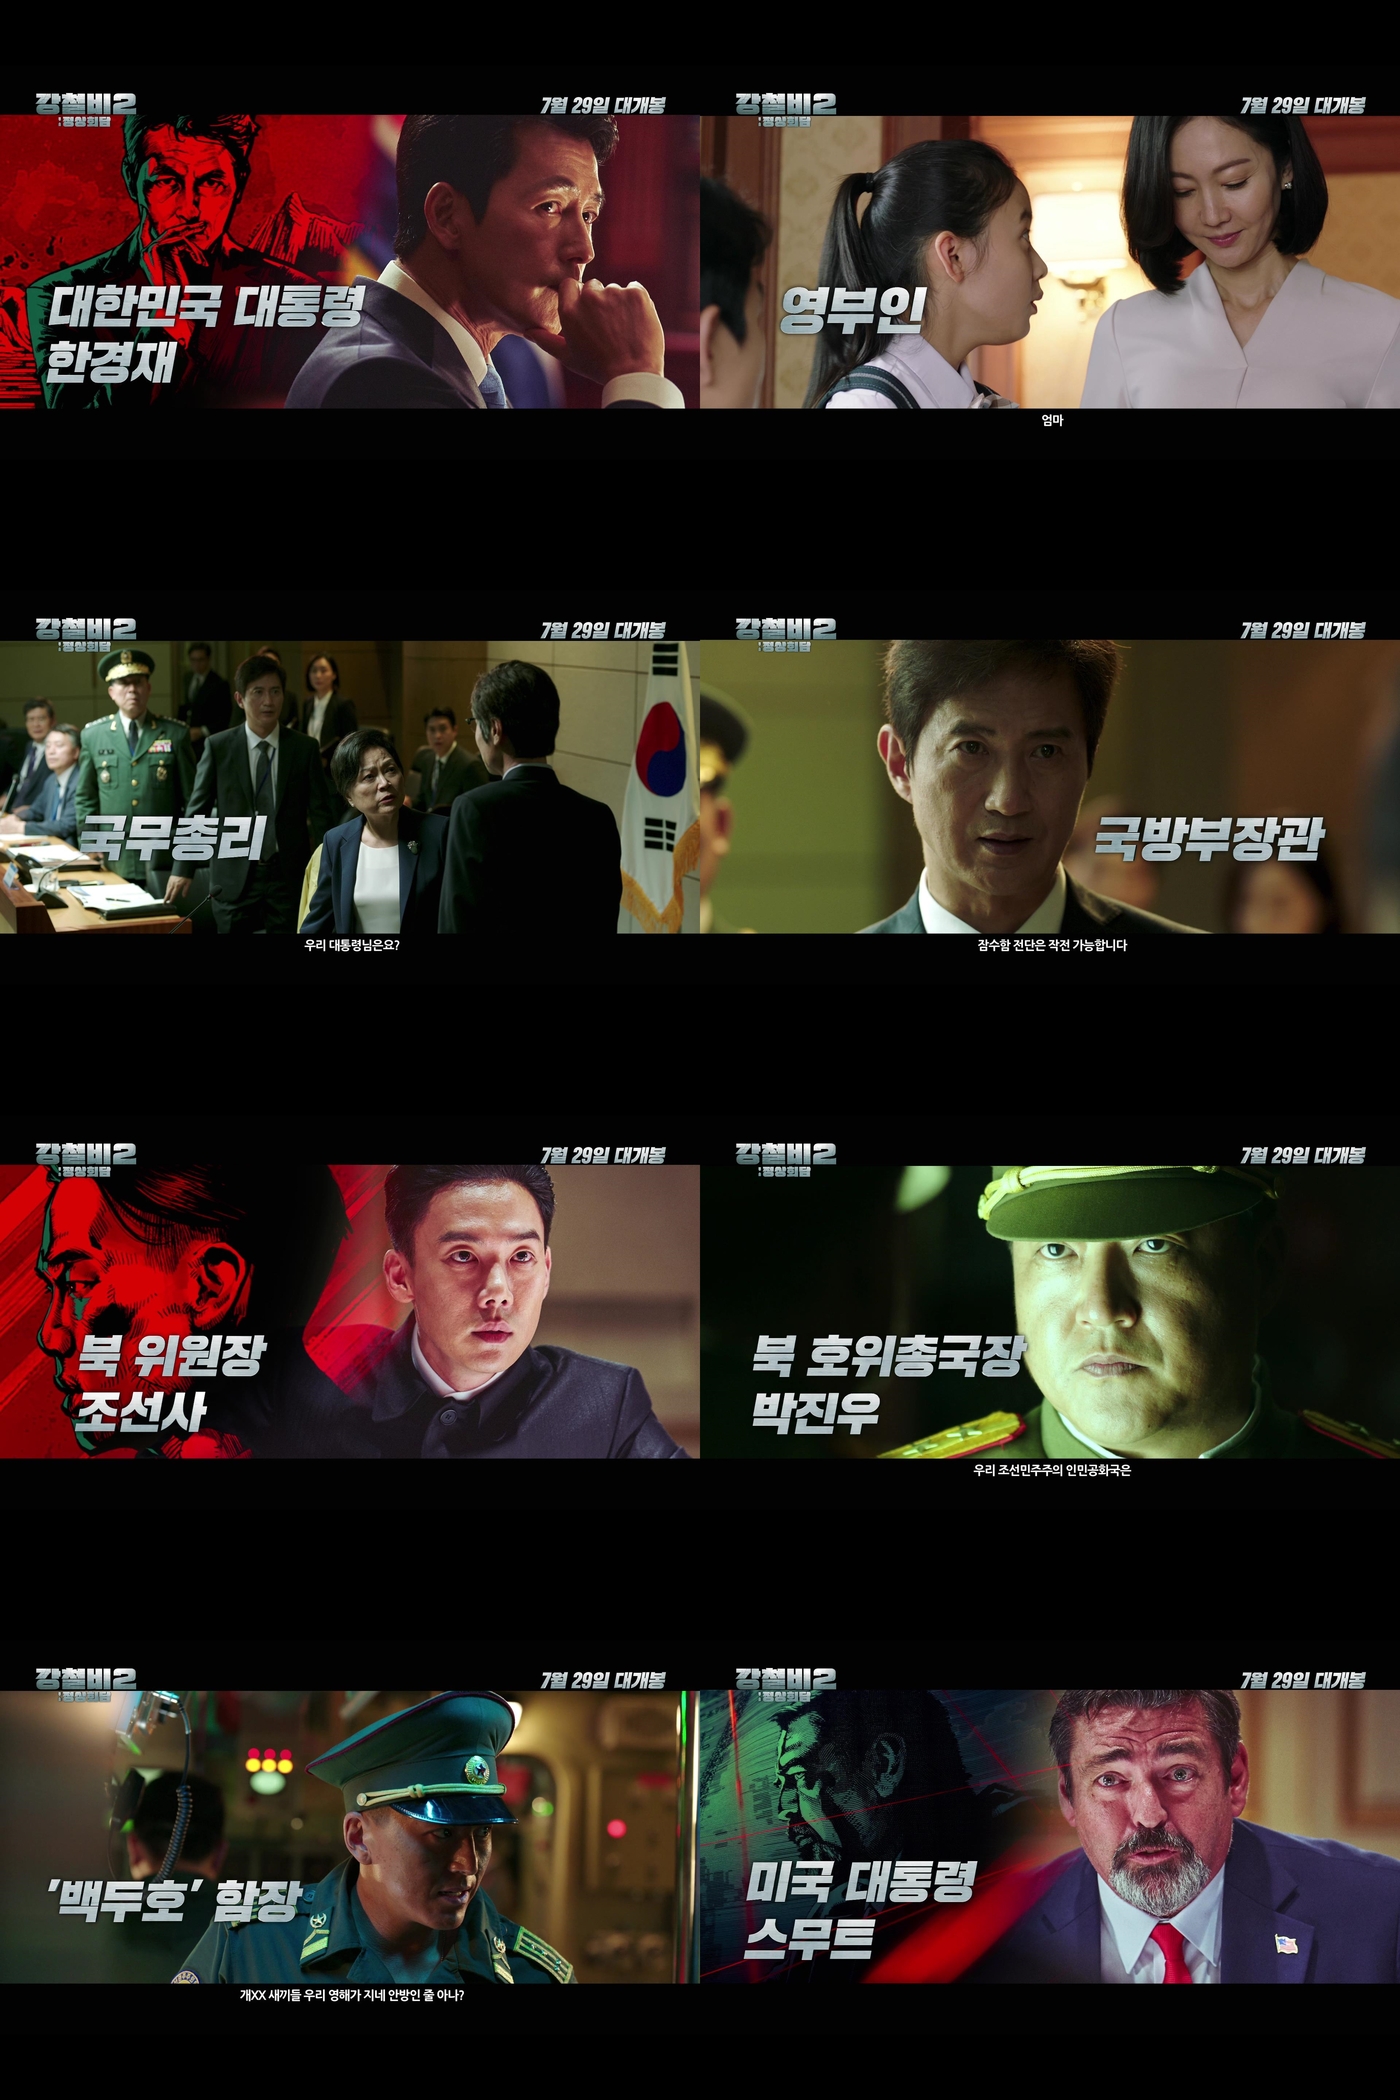 Seoul = = = Jung Woo-sung, Kwak Do-won, and Yoo Yeon-seok, and Steel Rain 2: Summit, which became a hot topic for director Yang Woo-suks new work, released a character trailer featuring people moving South, North and U.S.Steel Rain 2: Summit is a film about the Danger situation just before the war that takes place after the three leaders were kidnapped by the Norths nuclear submarine during the North and South America Summit.Along with the leaders of South, North and South Korea, we have released a character trailer that shows people who carry the fate of Northeast Asia and even the former World beyond Korean Peninsula.First, President South Korea (Jung Woo-sung) is an ordinary father who almost takes his allowance from his daughter before being the supreme leader of a Europe, and a small Husband who shares his troubles with the first lady (Yeom Jung-ah), and can be seen as the most comfortable and human charm when he is with his family.On the other hand, like the ambassador We have been invited to this peace talks but we have no place to sign, I feel sorry that I can not do anything as the president of South Korea, but the fact that I am in a hurry to narrow the gap between the two leaders of North Korea and the US,At the time of trying to establish a peace regime for Korean Peninsula, President South Korea will be trapped in a North Korean nuclear submarine with the North and the US leaders.South Koreas Prime Minister (Kim Yong-rim), Security Chief (Lee Jae-yong) and Defense Minister (Guidelines) are the first to take care of the presidents safety and respond quickly, showing the solid South Koreas vigor even in the absence of the president and adding to the vitality of the drama.Meanwhile, Yoo Yeon-seok, who has Acted North Koreas young supreme leader, North Koreas chairman, who believes that the Norths way to live is denuclearization and openness, focuses attention on the will of North Korea leader, who has made the North Korea peace agreement for the first time in history, against Hard-liners opposition.Especially, as he tells South Korea President who hesitates to speak in English, he talks in English with United States of America President and looks at the international situation. He shows off his human charm and raises unexpected laughter and chemistry.On the other hand, Kwak Do-won, who has been working on the supervisor general who thinks that North Korea is the only way to live in the alliance with China, said, Our Democratic Peoples Republic is reforming and opening up wrong. Kwak Do-won, who has been working on a coup detat, expressed the patriotism and beliefs of North Korea Hard-liner with his heavy acting.Here, the appearance of the Deputy Captain (Chief Shin Jung-geun) and Chief Ryu Soo-young (Chief Ryu Soo-young) of North Koreas top strategist Baek Doo-ho in the battle of submarines stimulates curiosity about what they will do between the leaders of South, North and US detained in the North nuclear submarine and the chief of the escort.Finally, Smooth (Angus McWang Feifeiden) is a United States of America president from a businessman whose first priority is to return home with the North Korean nuclear program with the aim of making United States of America great again.The appearance of United States of America President Smoot, which is confined to a narrow captains room but does not hesitate to speak to North Korean soldiers who threaten themselves with a self-centered attitude, American First, is curious with a variety of tensions and comics.Also, the appearance of United States of America Vice Commander (Christine Dalton) and United States of America Secretary of Defense (Colby French) in the Cold War, which checks the emerging power China first and does not hesitate to launch ICBM (Intercontinental Ballistic Missile) in the situation where the South, North and US cleaning statues were kidnapped It heightens the sense of urgency by foreshadowing that the issue ofula will be entangled in the interests of the great powers and spread to wars that threaten peace in the former World.The character trailer of Steel Rain 2: Summit, which captures people who move their fate in different interests, different ways, and different ways, raises questions about what kind of drama characters will create in the drama.Meanwhile, Steel Rain 2: Summit is the only divided nation on the planet that has a Cold War in mind, the South and North, and the Danger situation that may actually happen between the powers surrounding the Korean Peninsula, Jung Woo-sung, Kwak Do-won, Yoo Yeon-seok, Angus McWang Feifeidon.It will be released on the 29th as a film that will be realistically drawn through the coexistence and confrontation of four actors who combine personality and acting power.